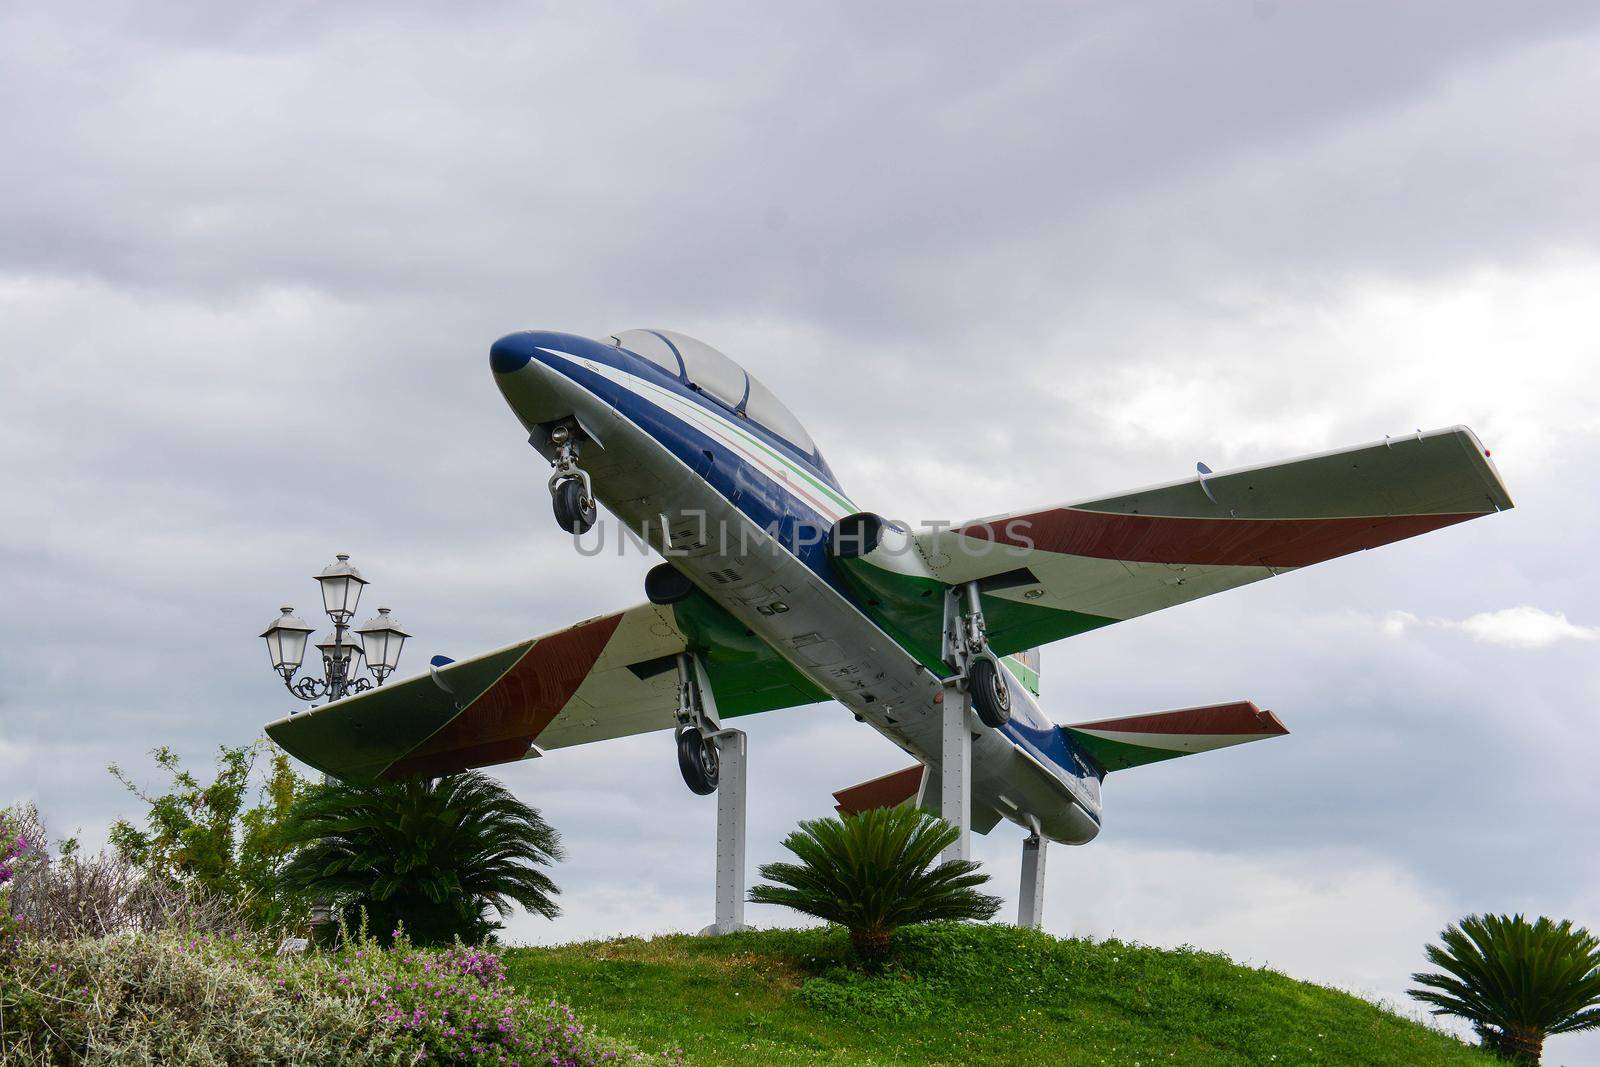 plane used by the Italian acrobatic team many years ago in free exposure

